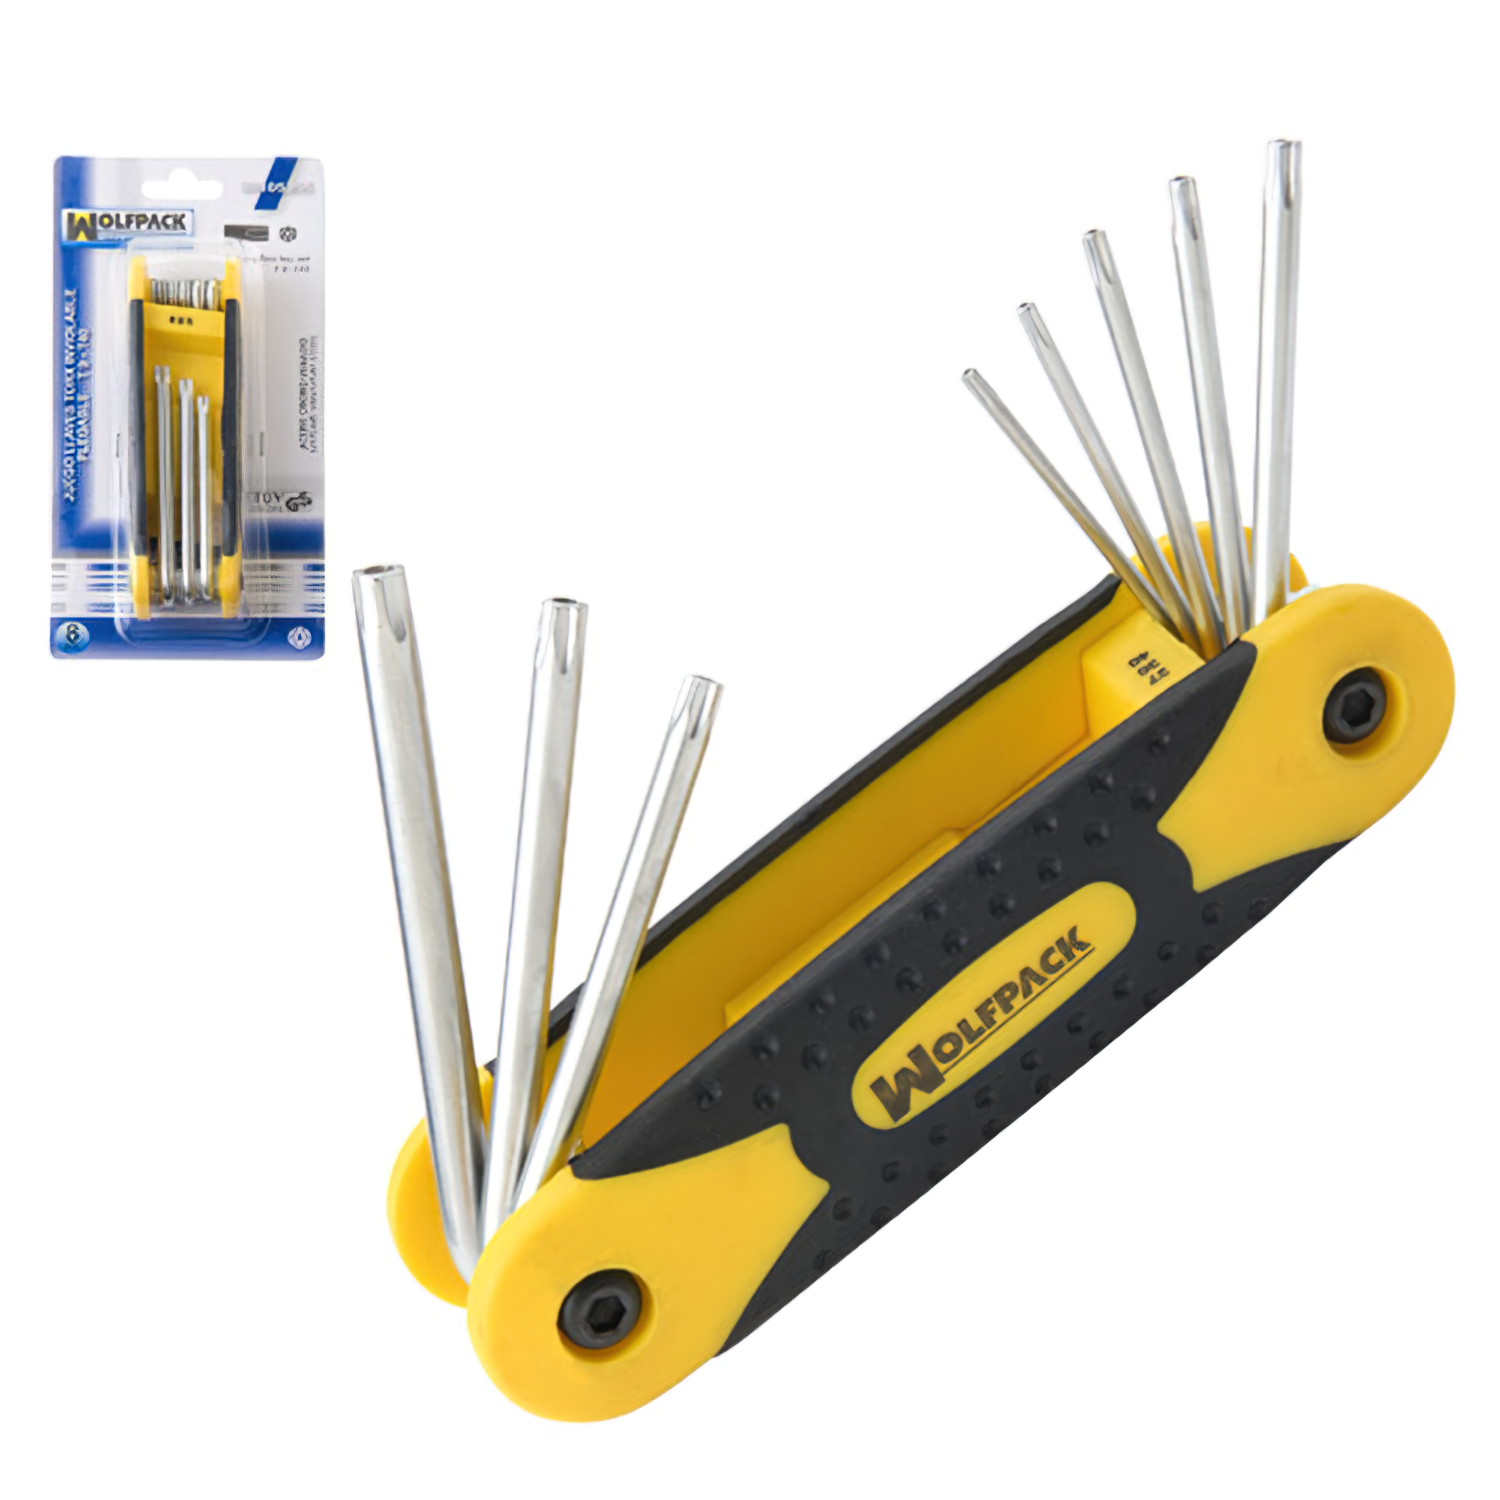 Juego Llaves Torx L 9 Piezas Inviolable WOLFPACK LINEA PROFESIONAL